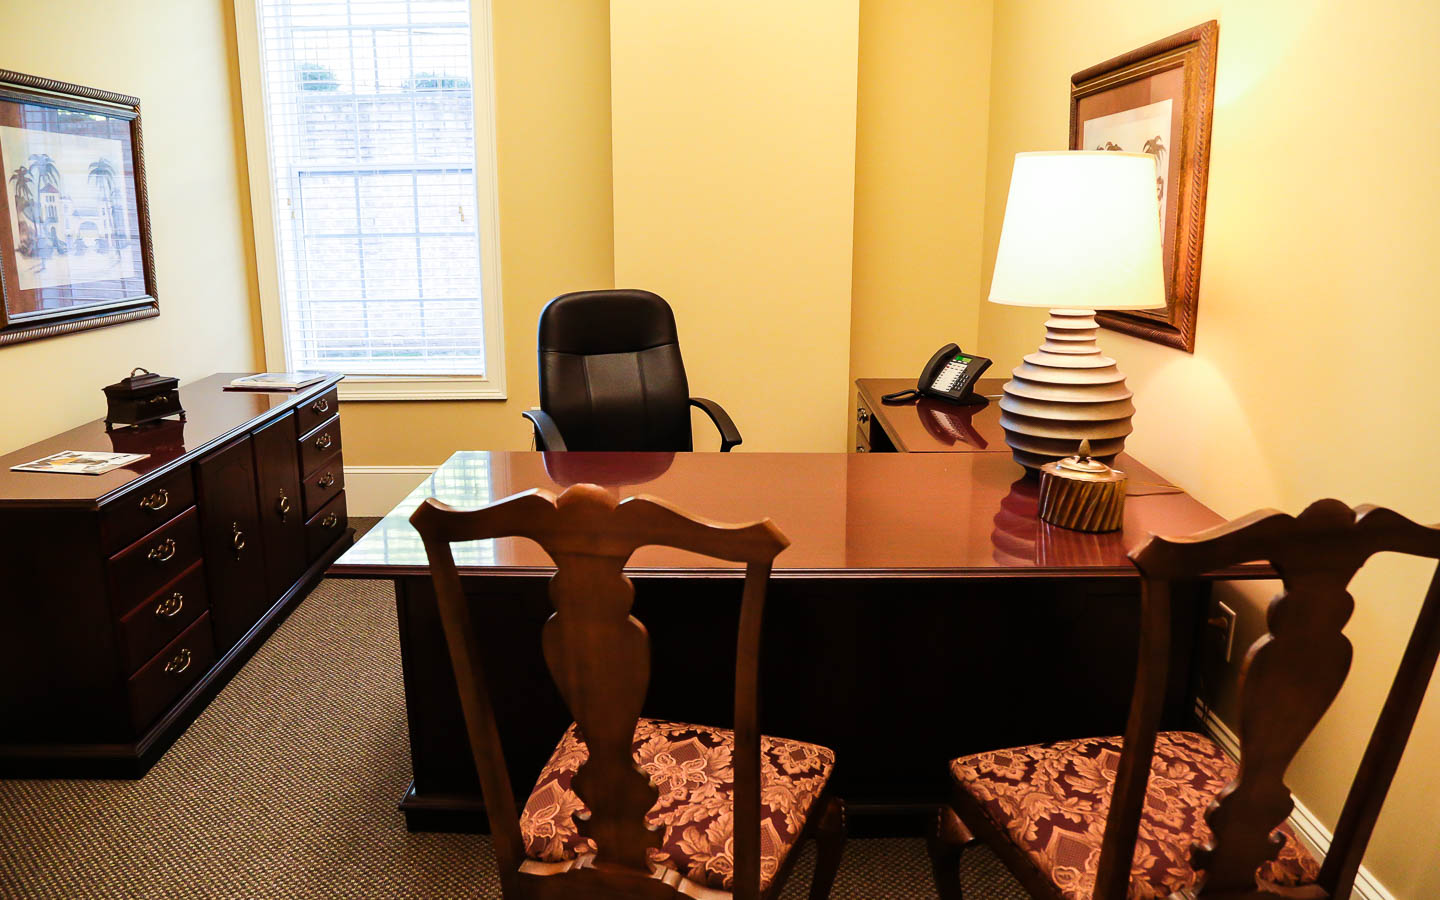 Offices at the Meritage